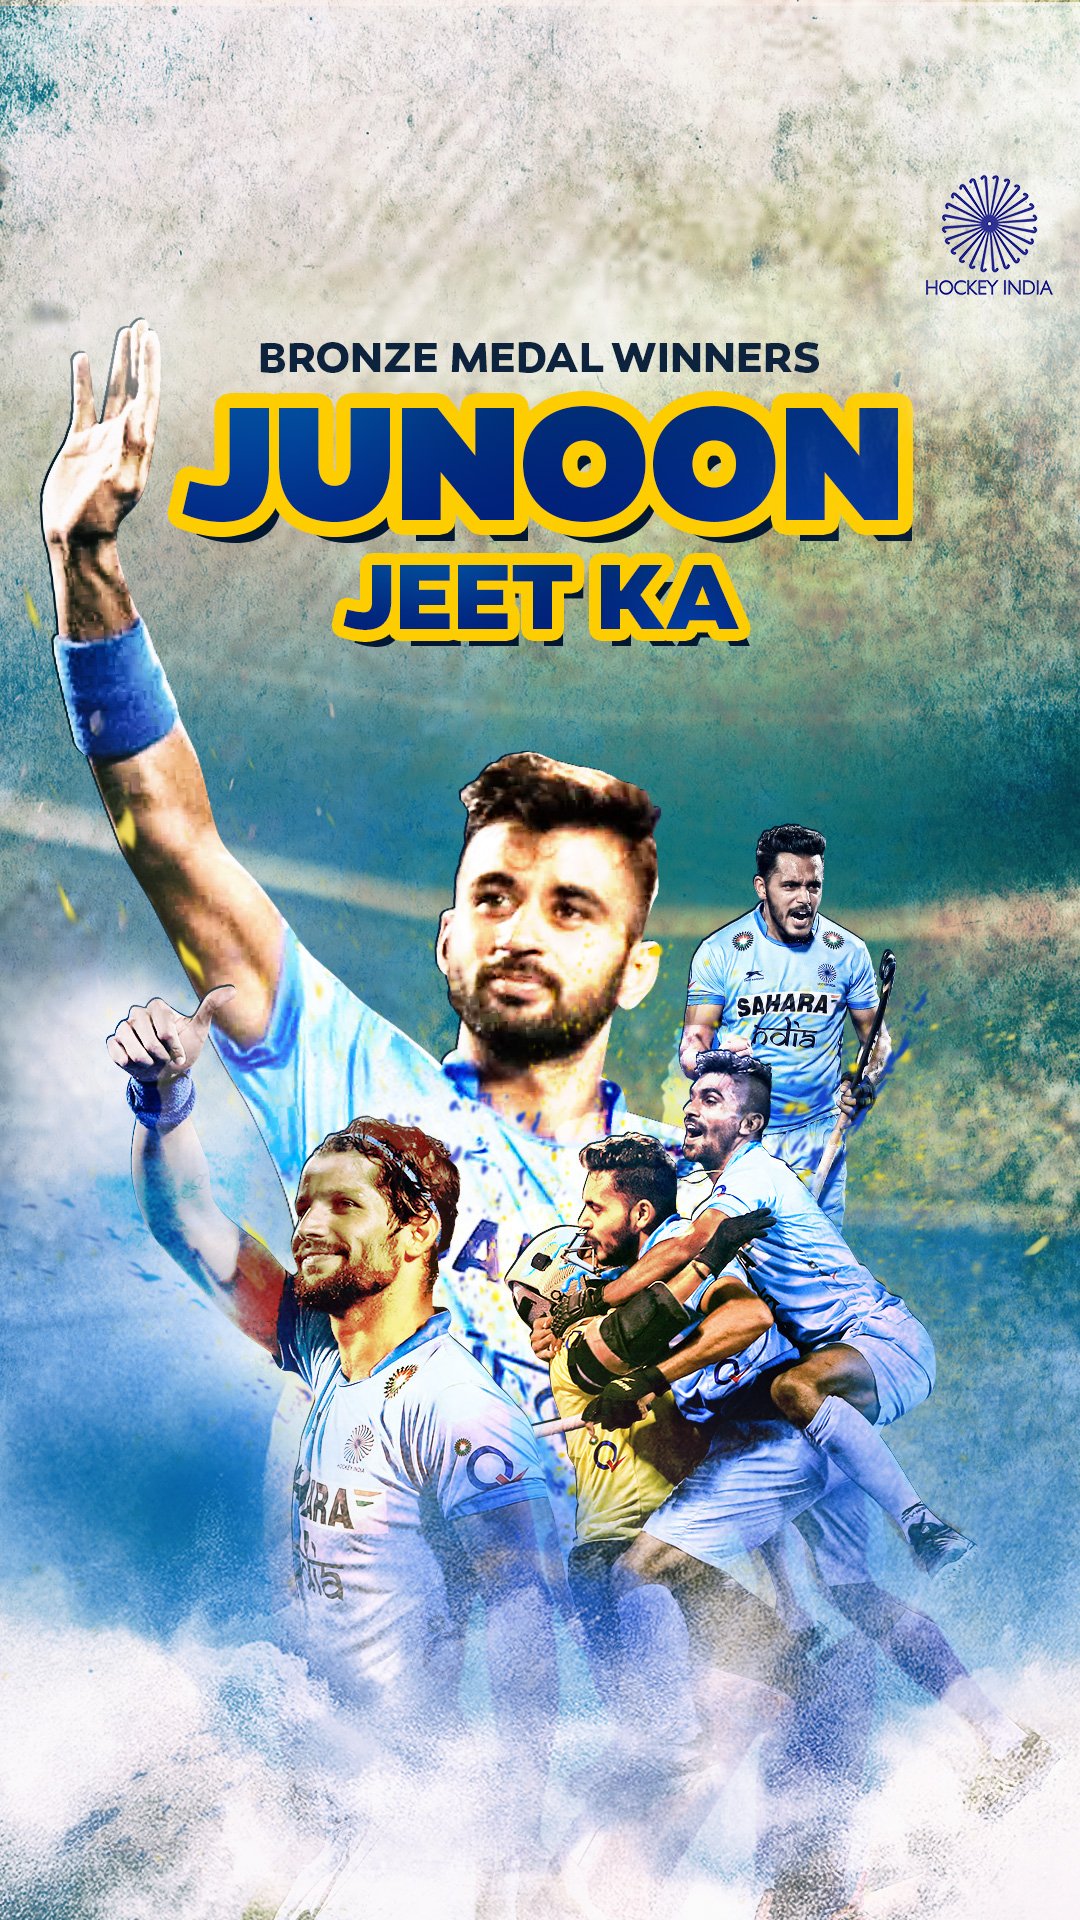 Hockey India's launching #JunoonJeetKa wallpaper after Team India's Bronze Medal winning campaign at the Odisha Men's #HWL2017 Final in Bhubaneswar! Download the Facebook cover, desktop and mobile versions from below